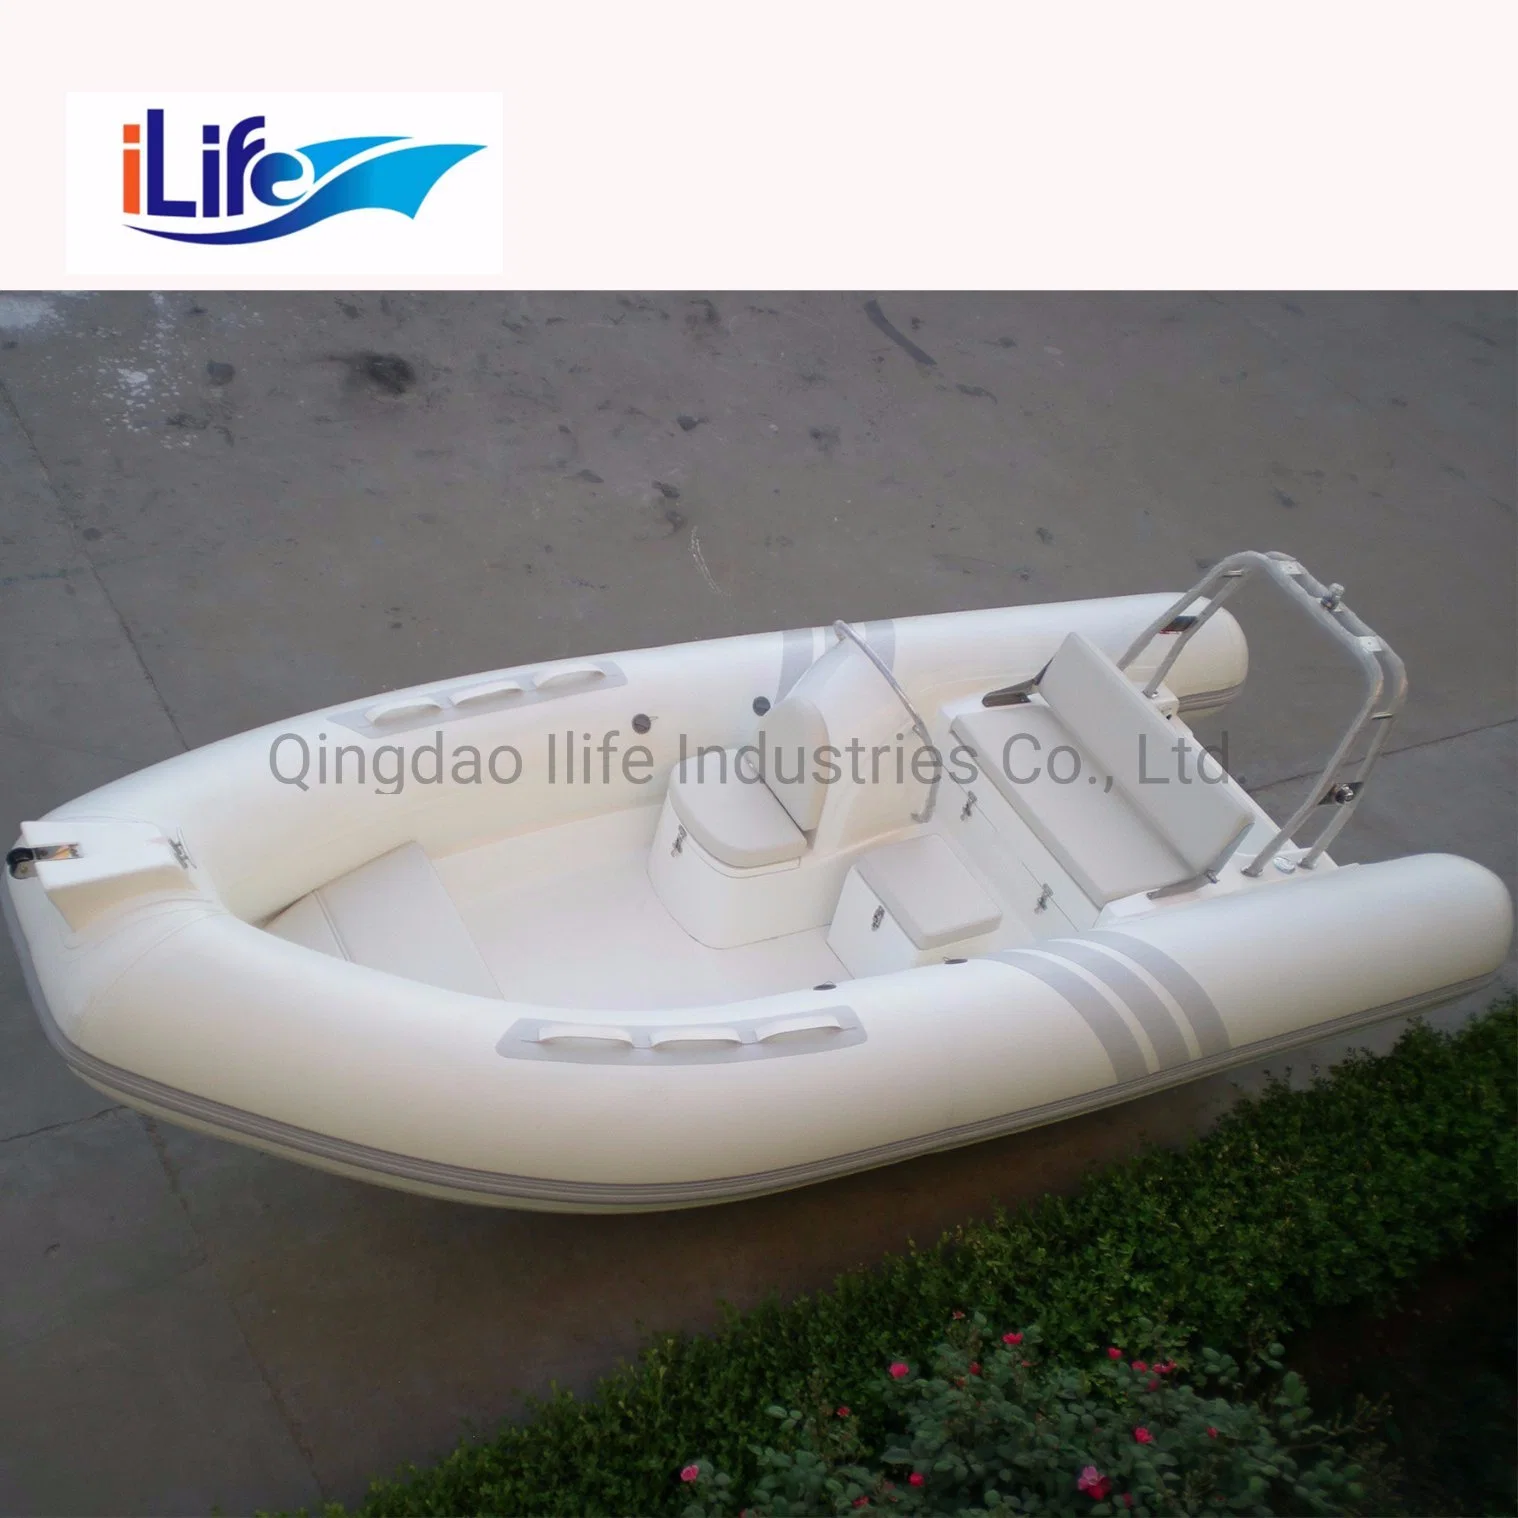 Ilife 4.8m Rescue PVC/Hypalon Rigid Hull Firberglass Inflatable Rubber Fishing Sport FRP Boat with Center Console for 8 Persons